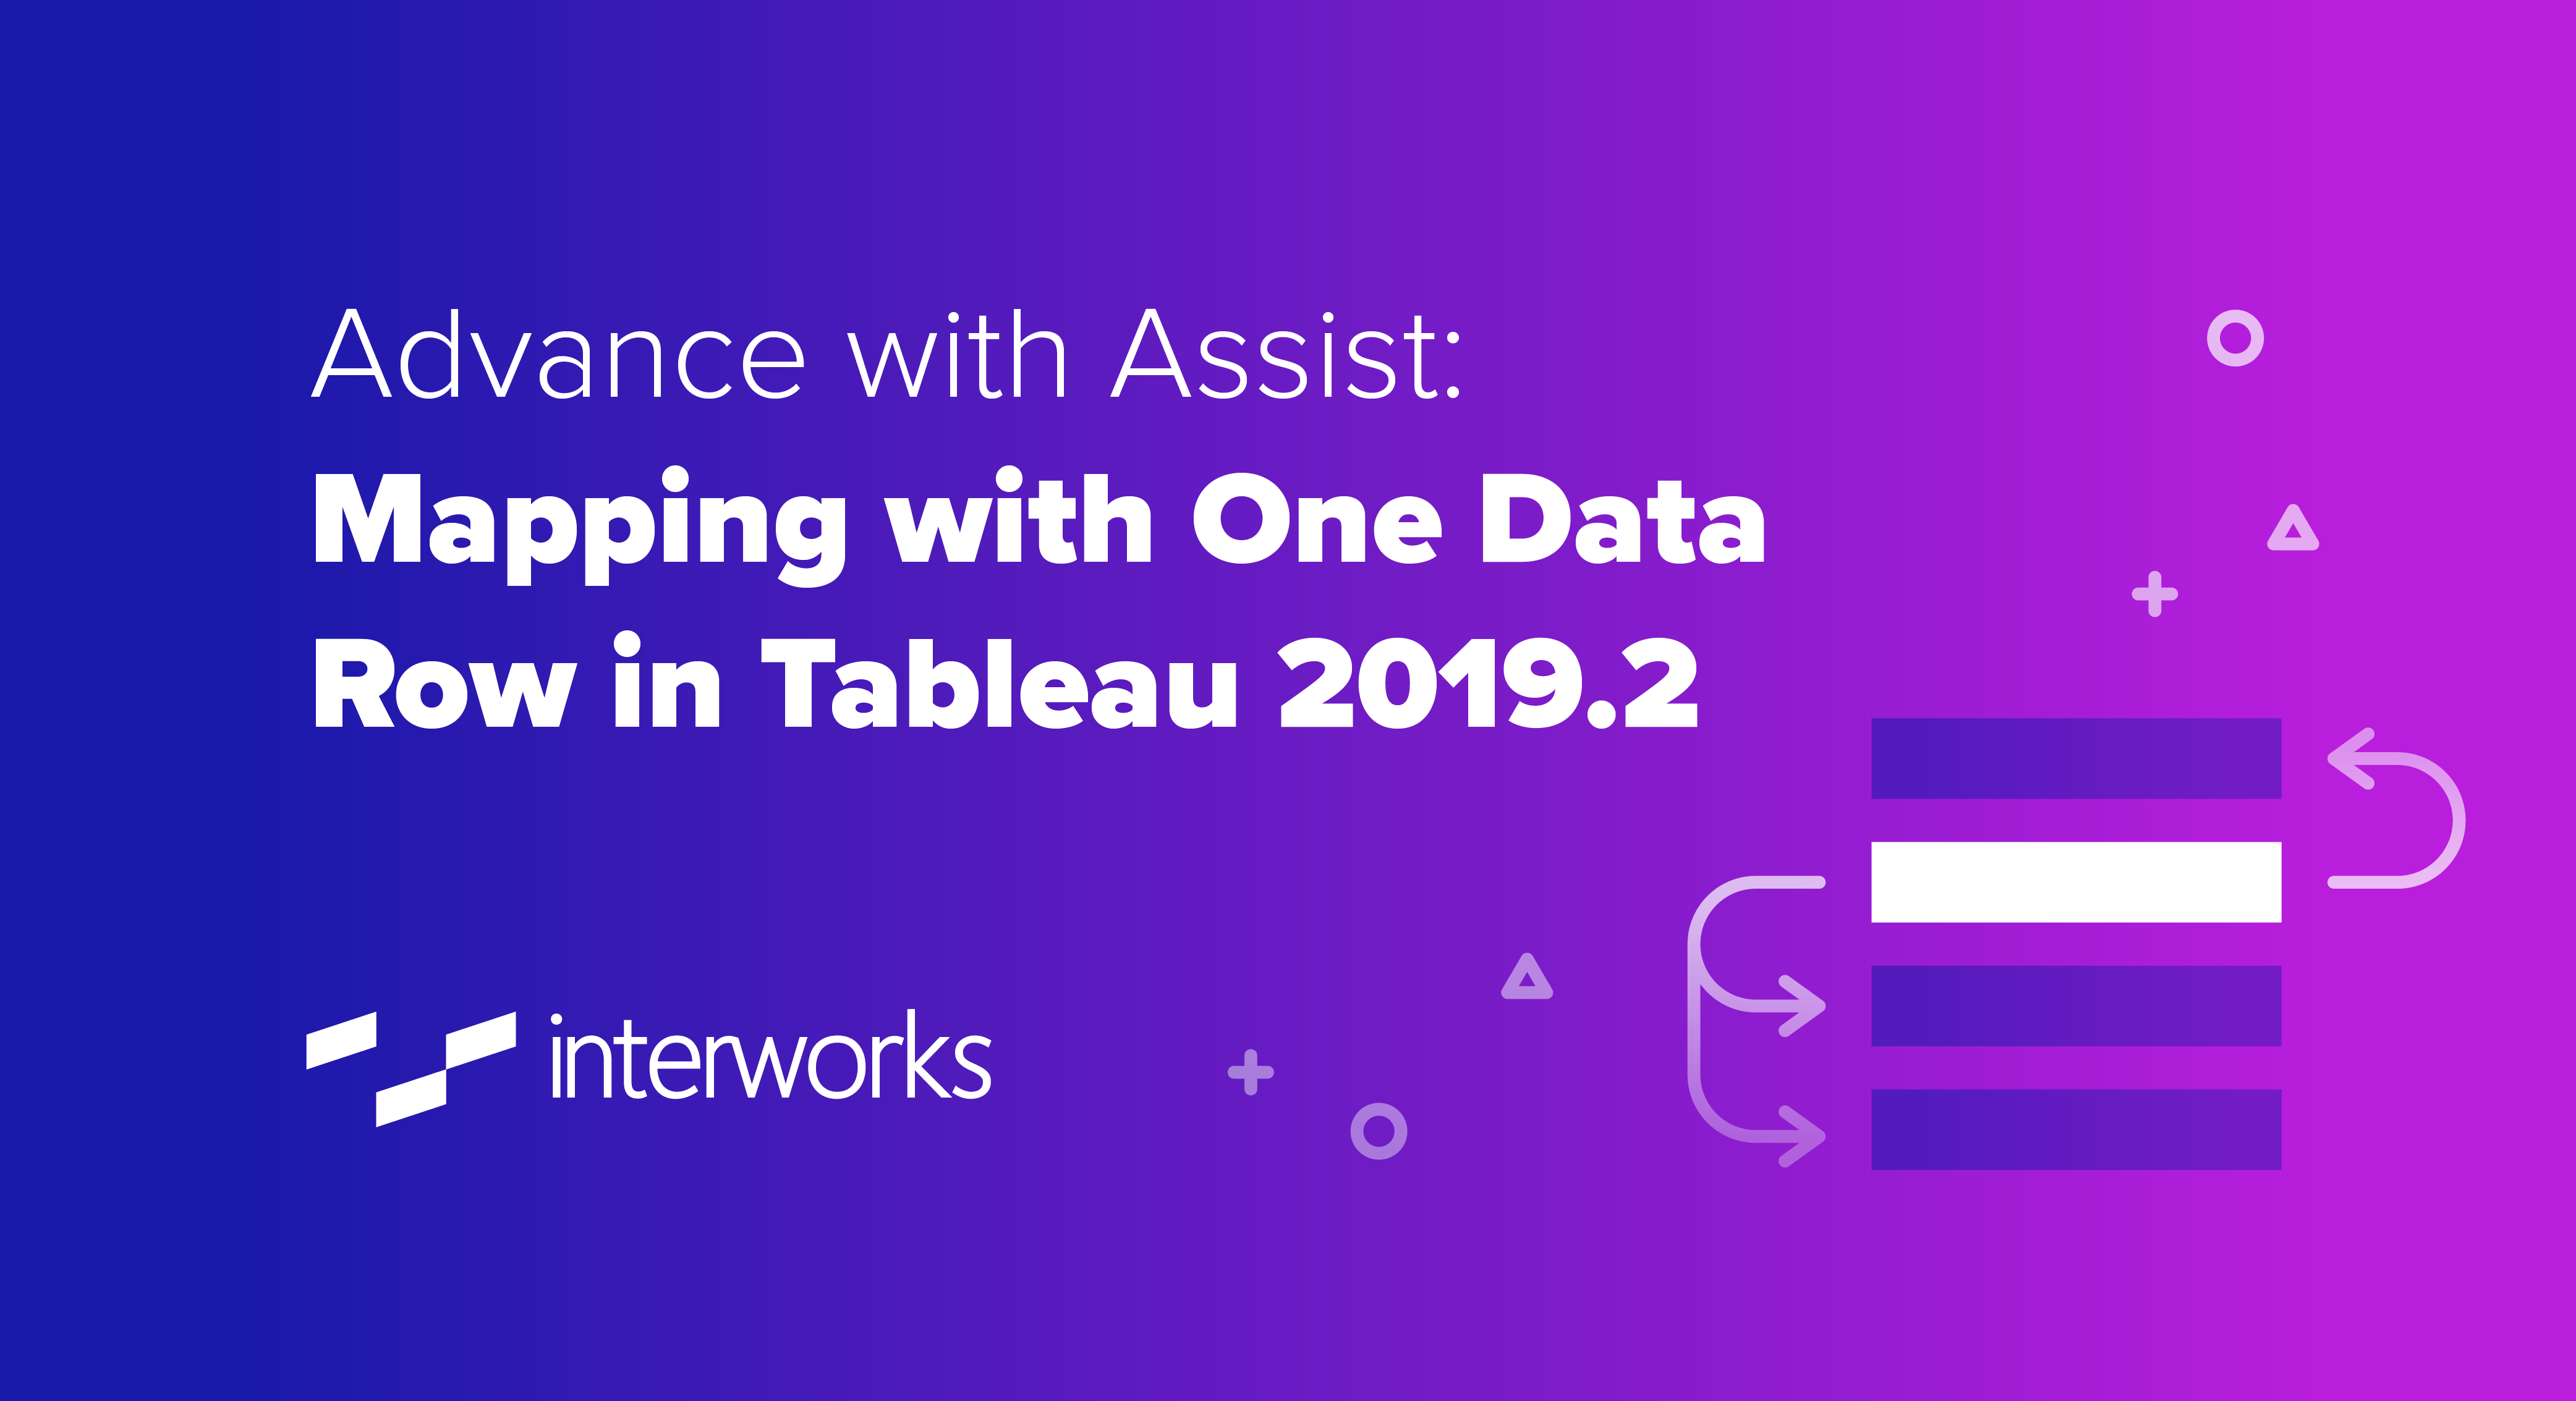 Advance with Assist: Mapping with One Data Row in Tableau 2019.2